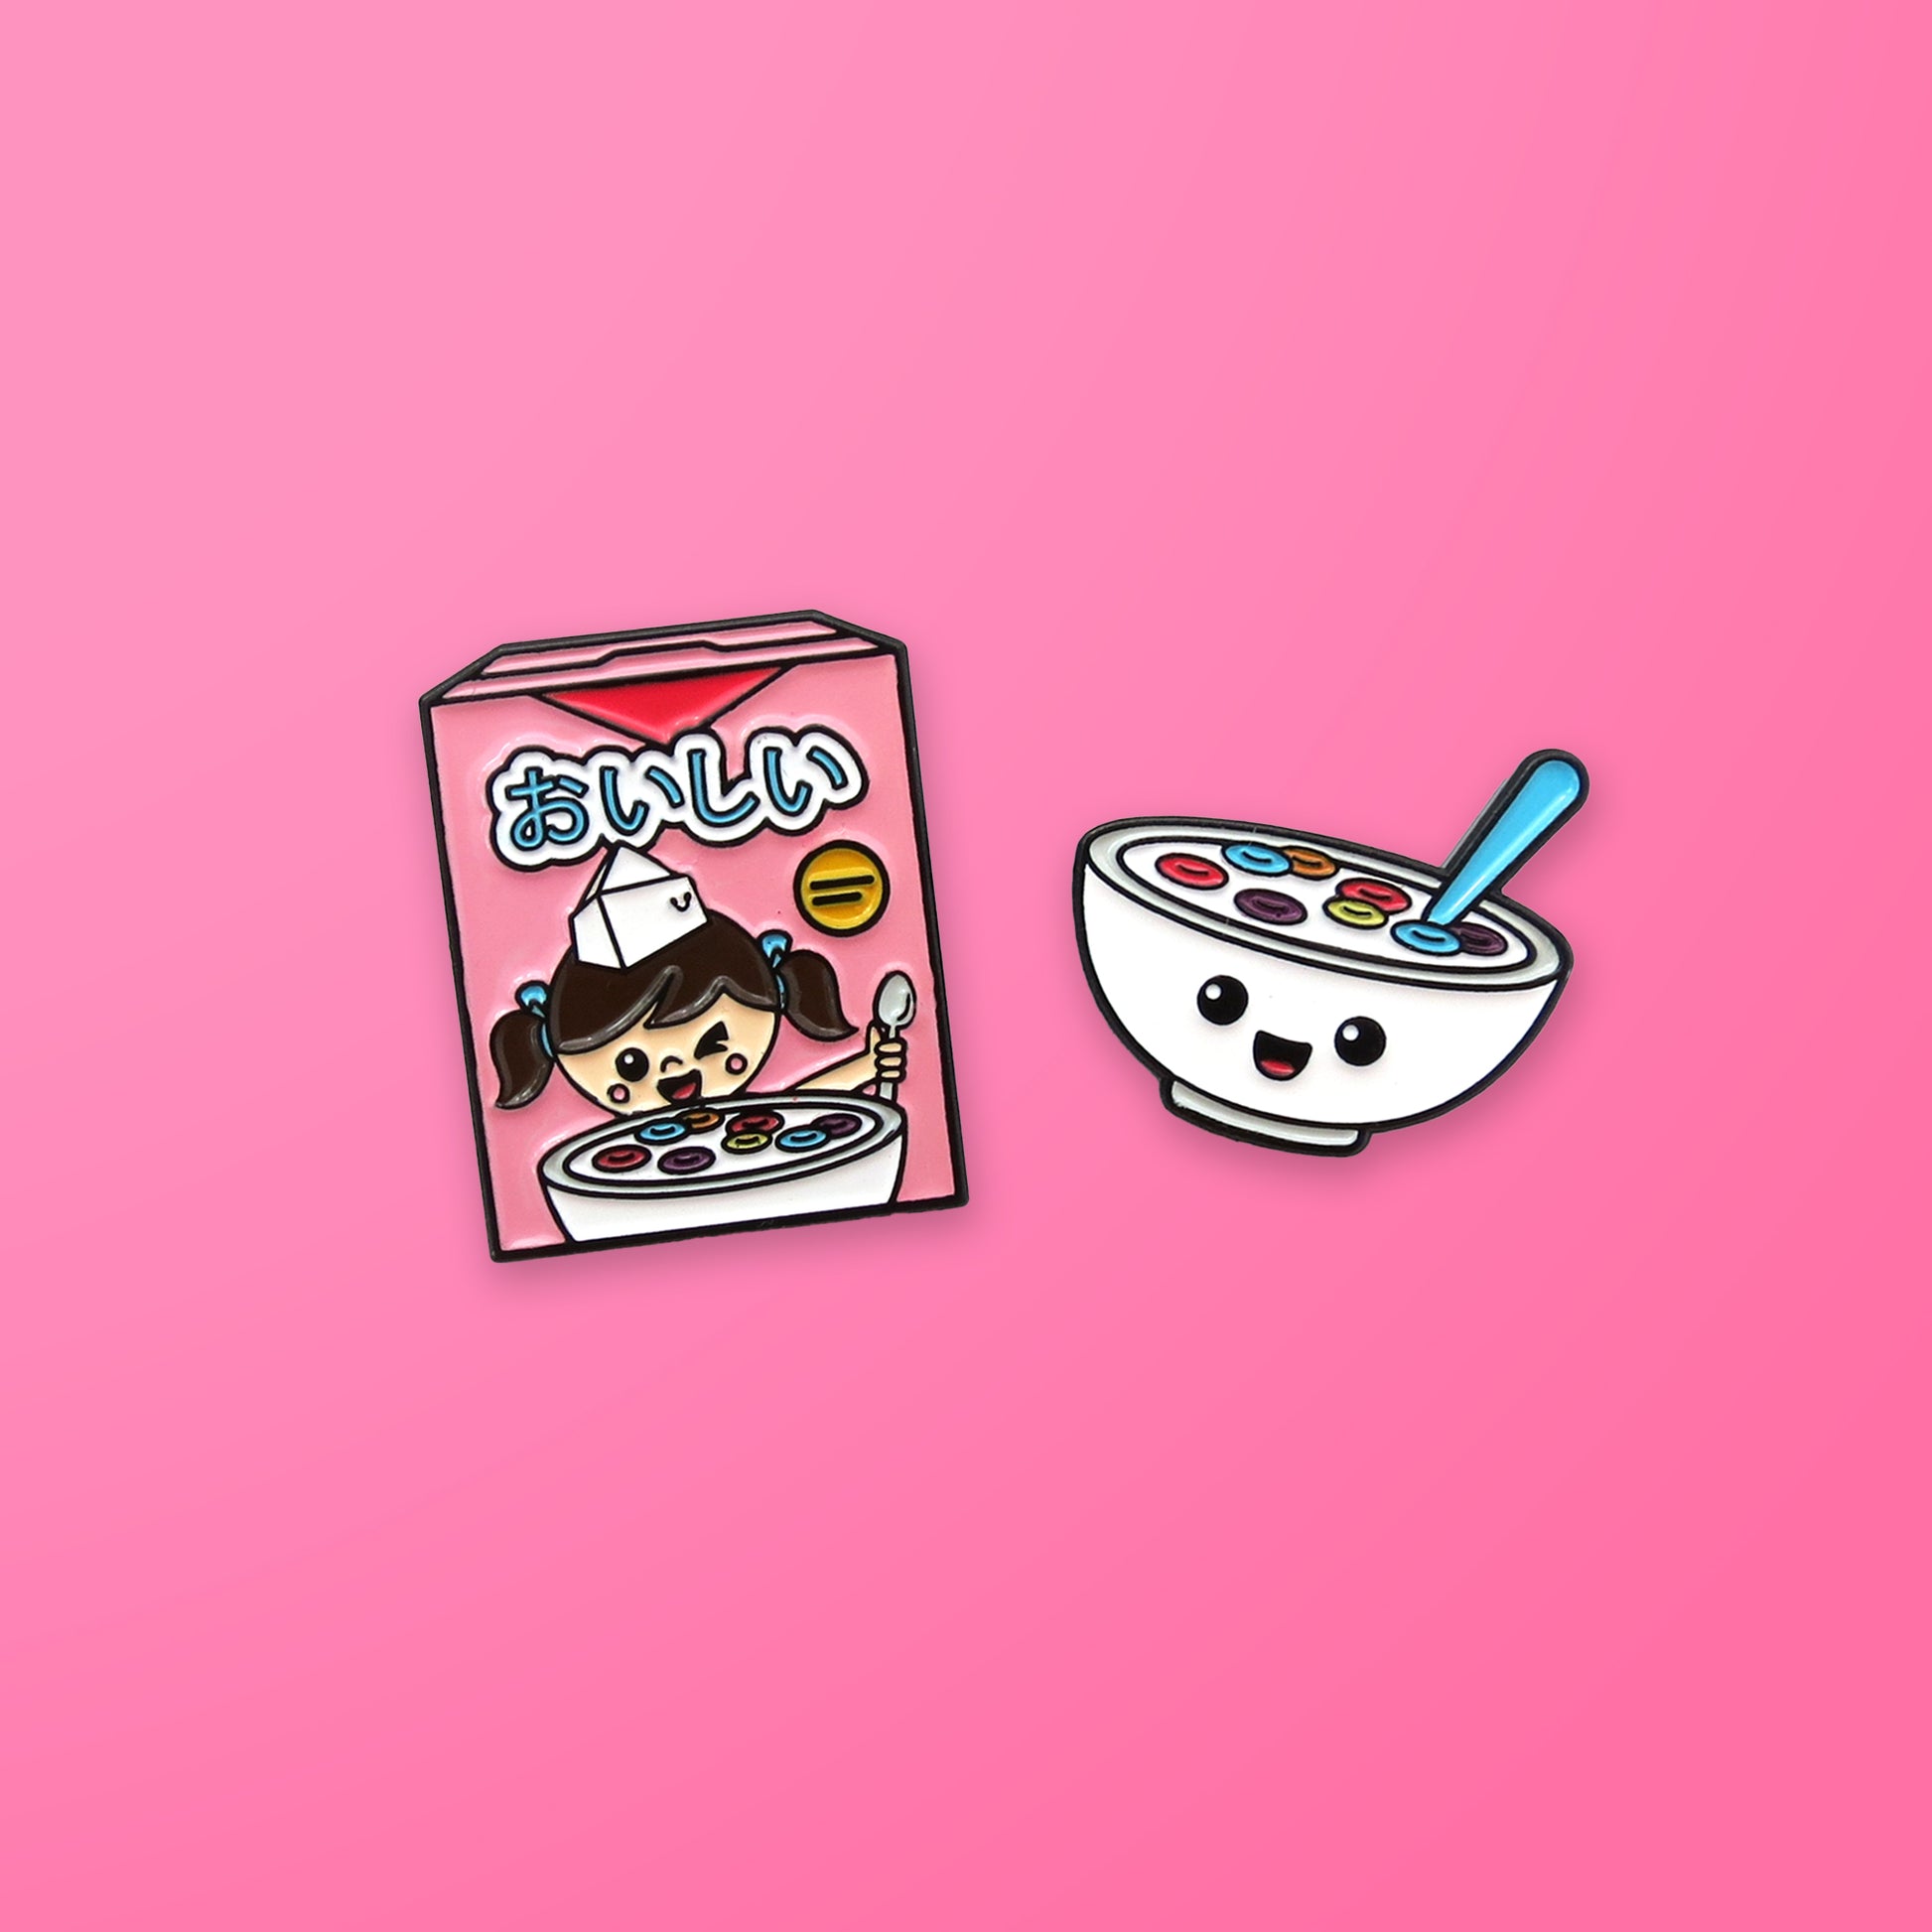 Fruity Cereal Box and Cereal Bowl enamel pin set on pink background